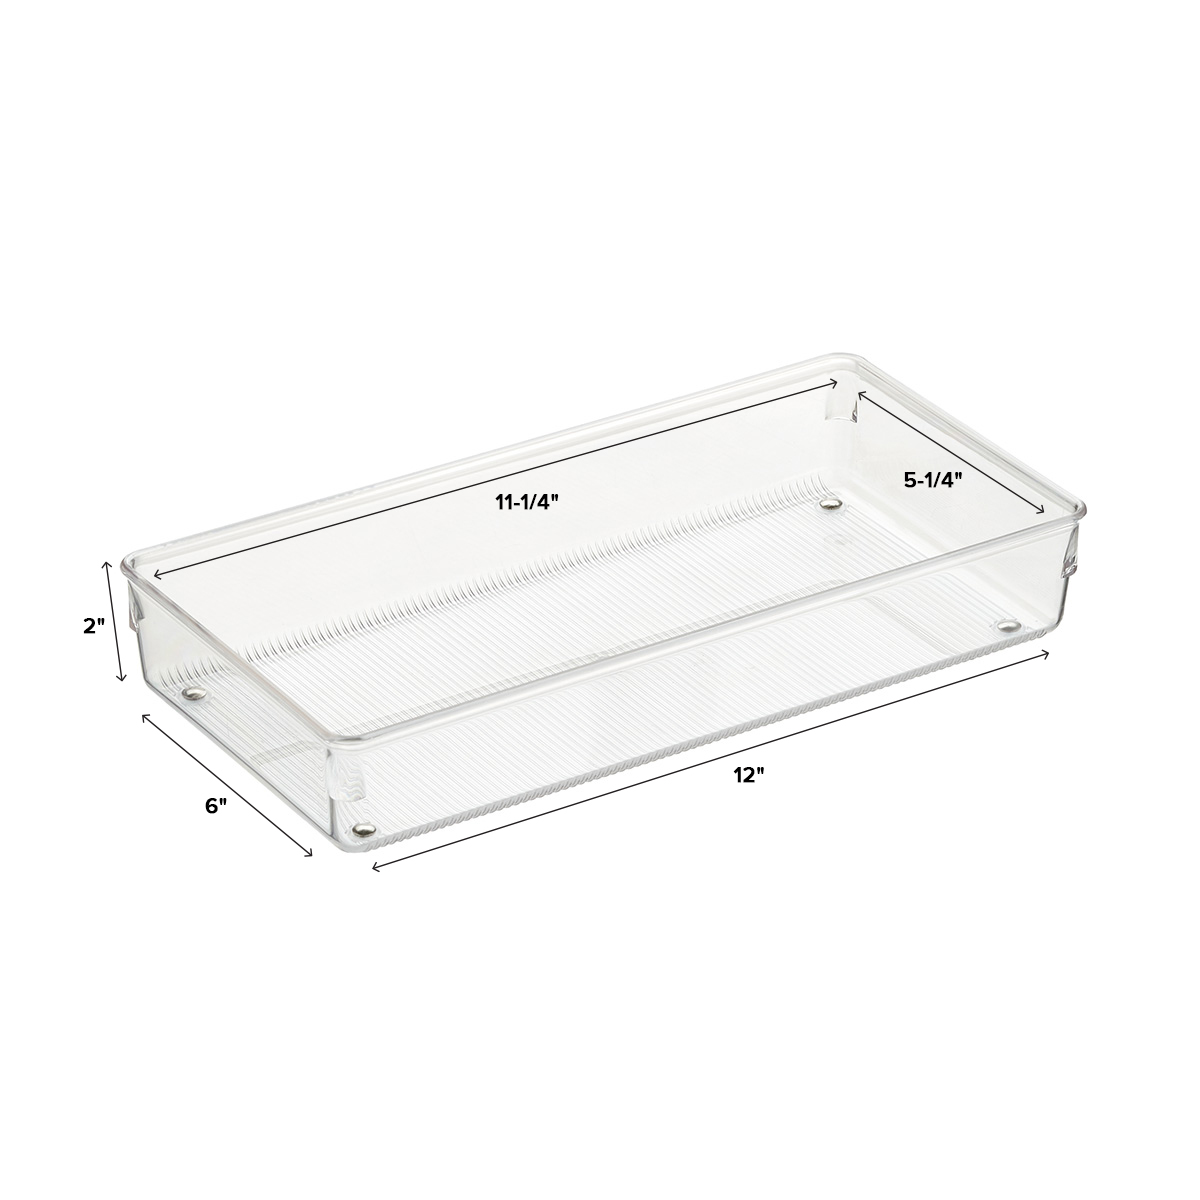 https://www.containerstore.com/catalogimages/445607/10037080-linus-shallow-drawer-organi.jpg